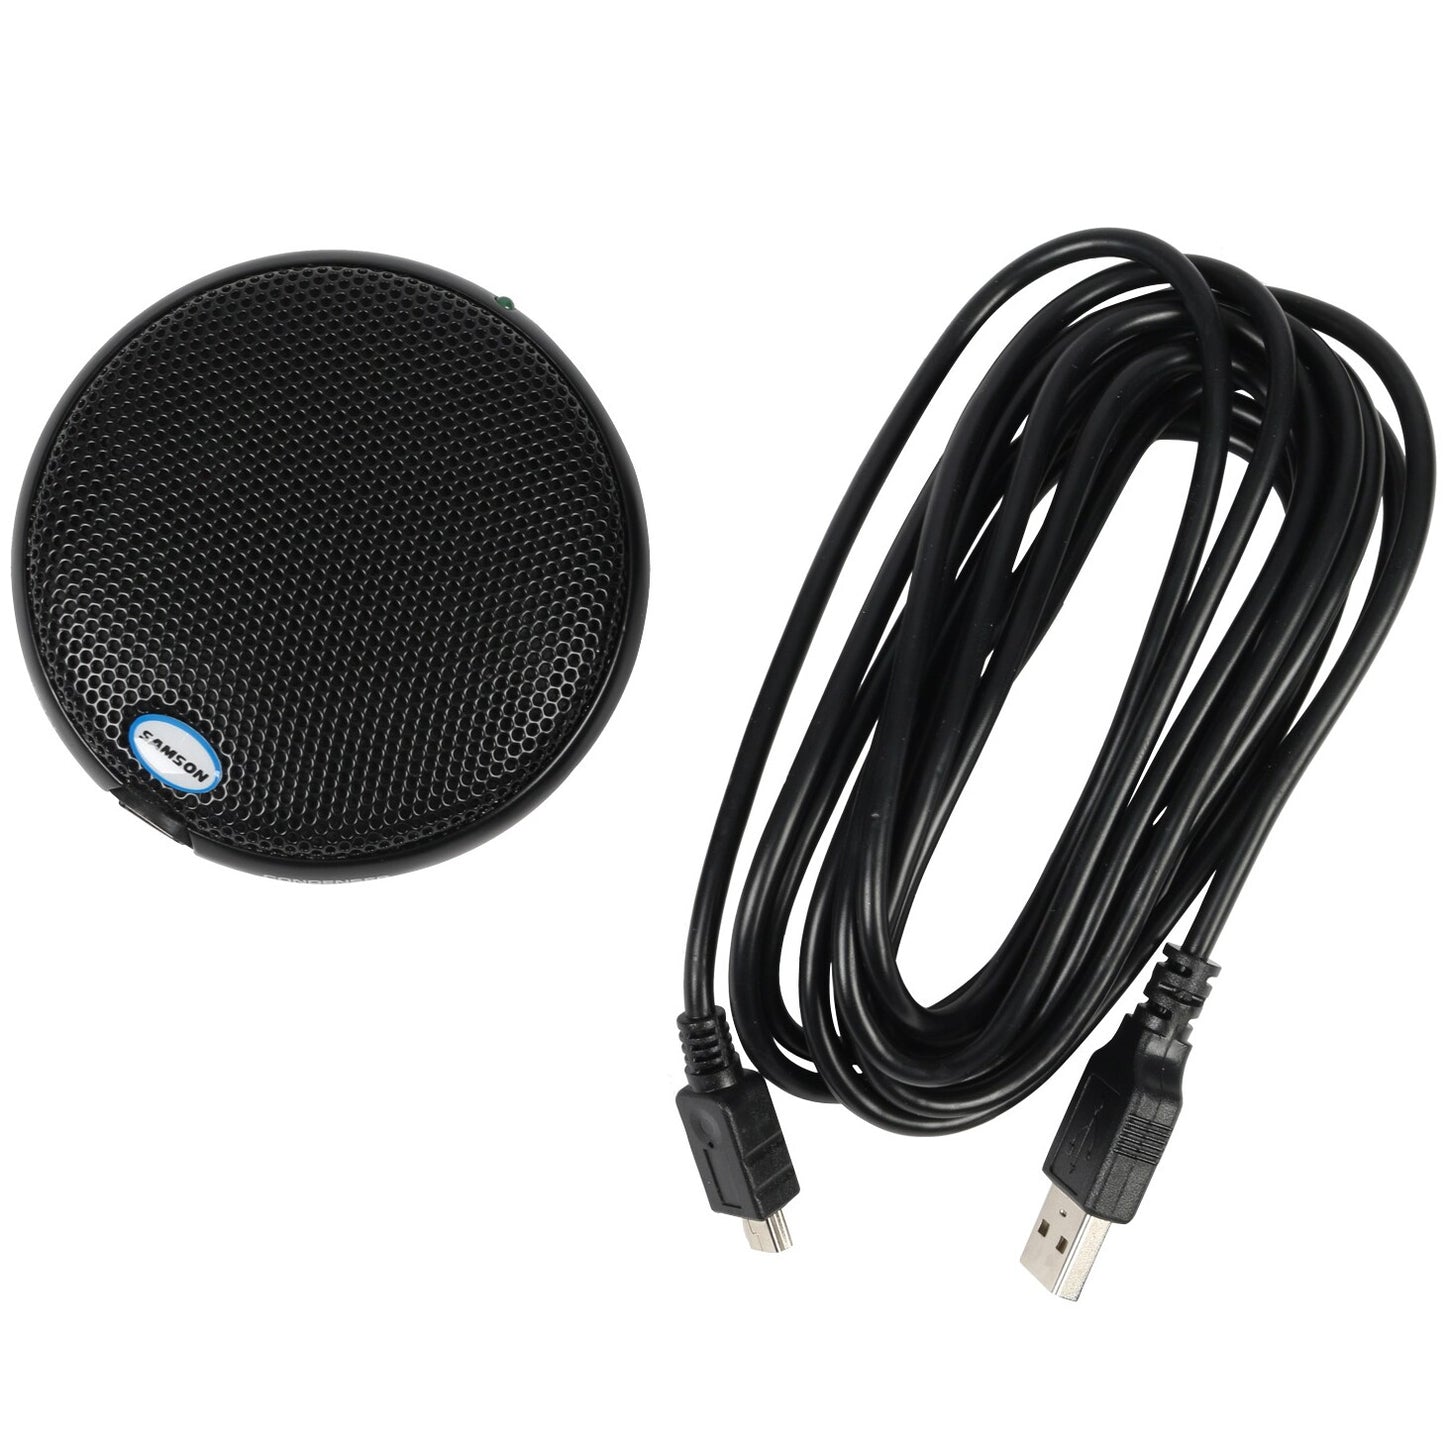 Samson UB1 Omnidirectional USB Boundary Condenser Microphone Surface-Mount Fixed Charge with Solid Zinc Body 10ft Cable